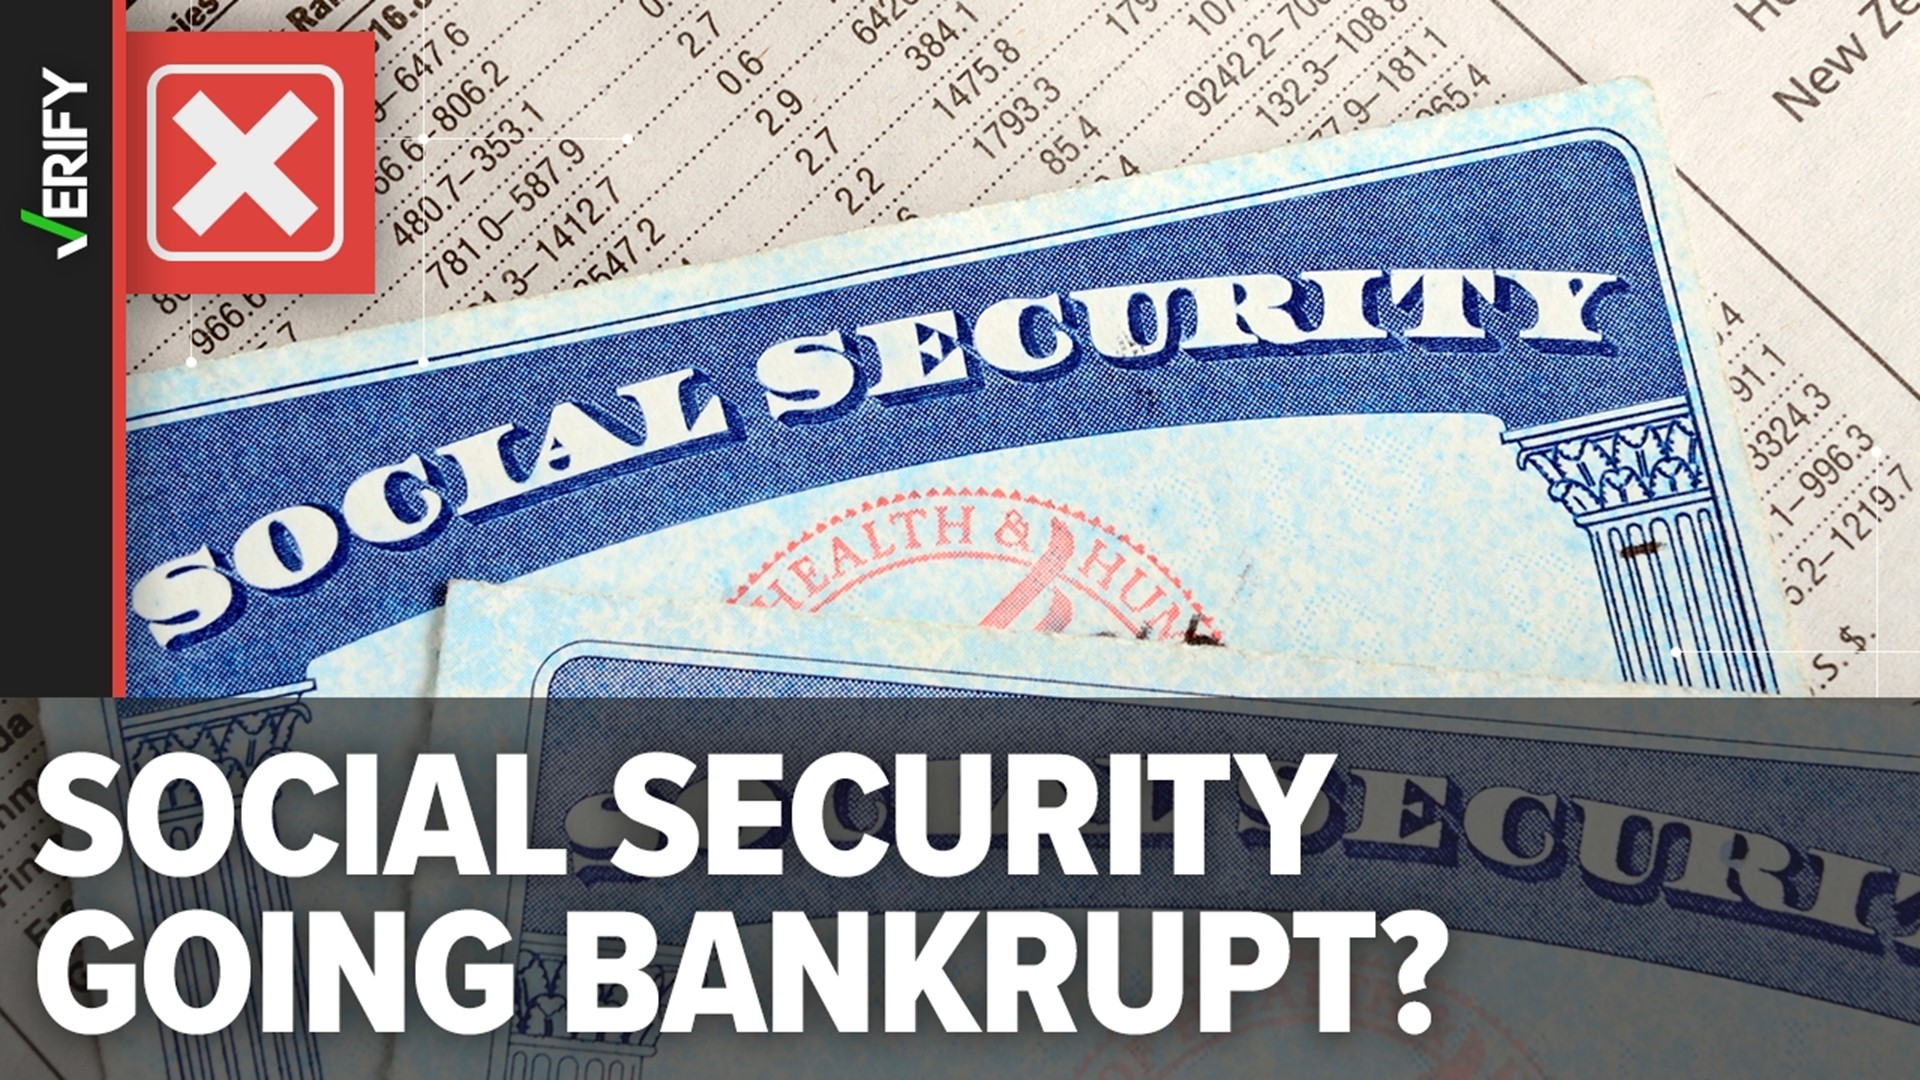 Social Security faces legitimate funding challenges, but it won’t completely run out of cash for monthly benefit payments.